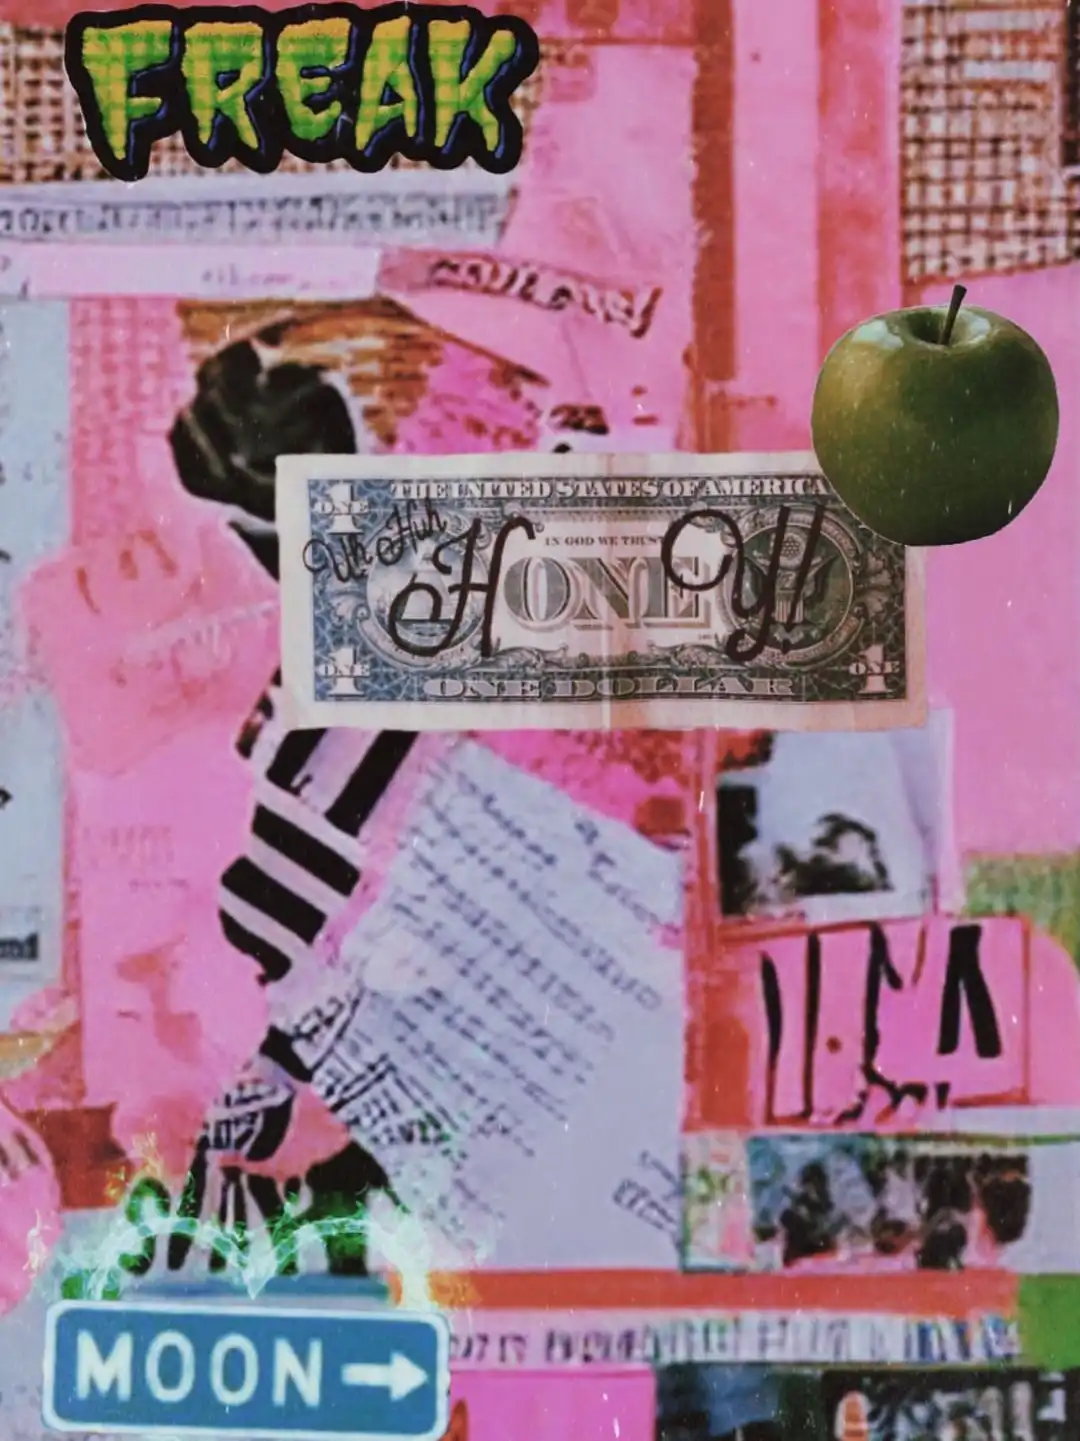 A collage of images including a dollar bill, an apple, and a sign that says 